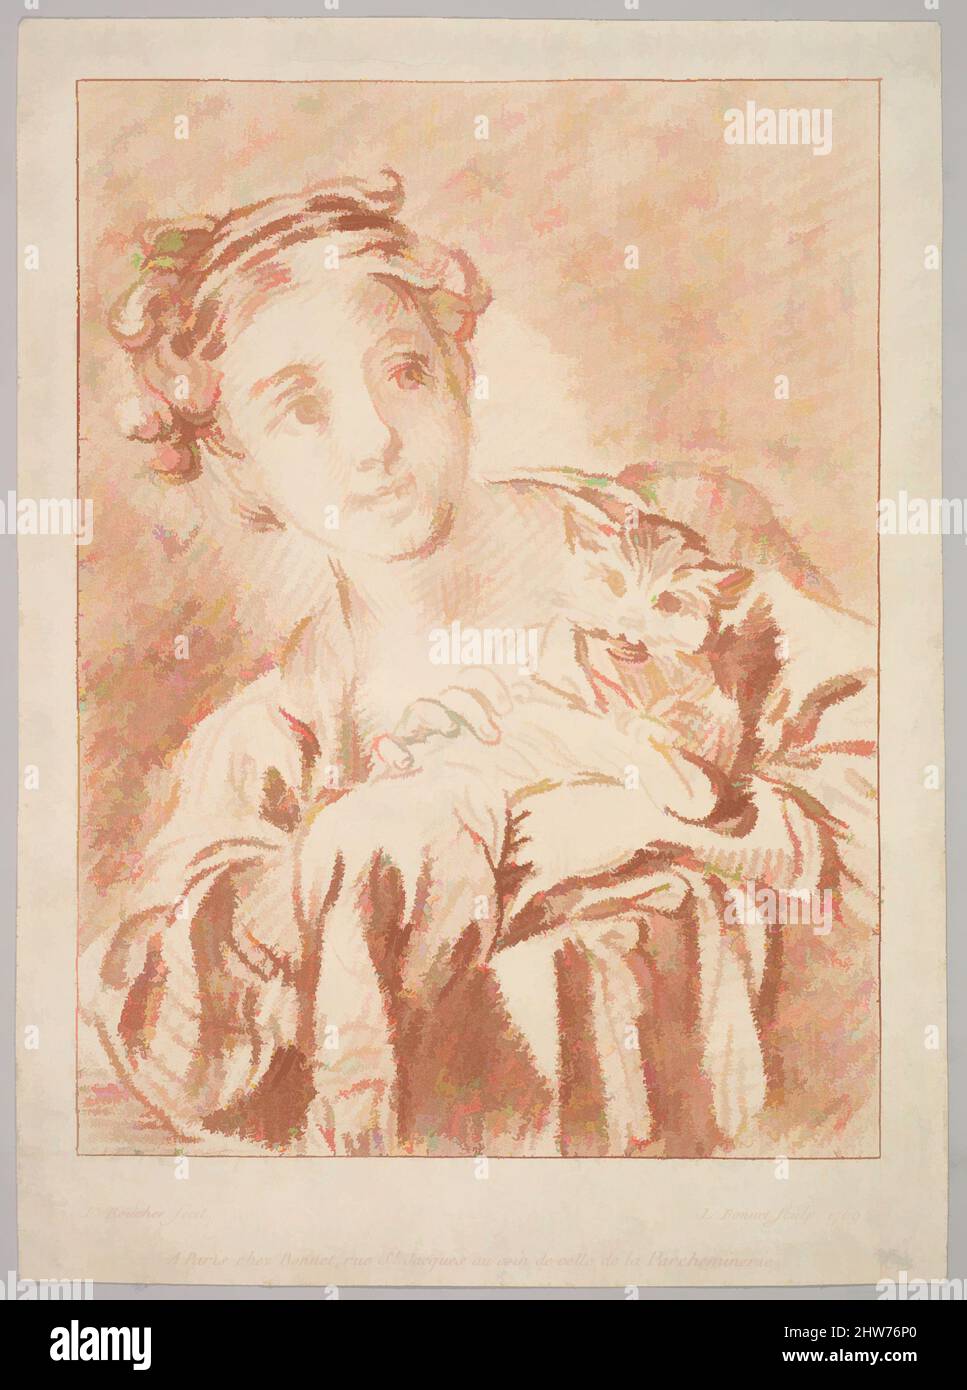 Art inspired by A Young Girl holding a Cat, 1769, Crayon-manner engraving printed in sanguine ink; second state of two, Sheet (trimmed): 8 3/16 in. × 6 in. (20.8 × 15.3 cm), Prints, Louis Marin Bonnet (French, Paris 1736–1793 Saint-Mandé, Val-de-Marne), After François Boucher (French, Classic works modernized by Artotop with a splash of modernity. Shapes, color and value, eye-catching visual impact on art. Emotions through freedom of artworks in a contemporary way. A timeless message pursuing a wildly creative new direction. Artists turning to the digital medium and creating the Artotop NFT Stock Photo